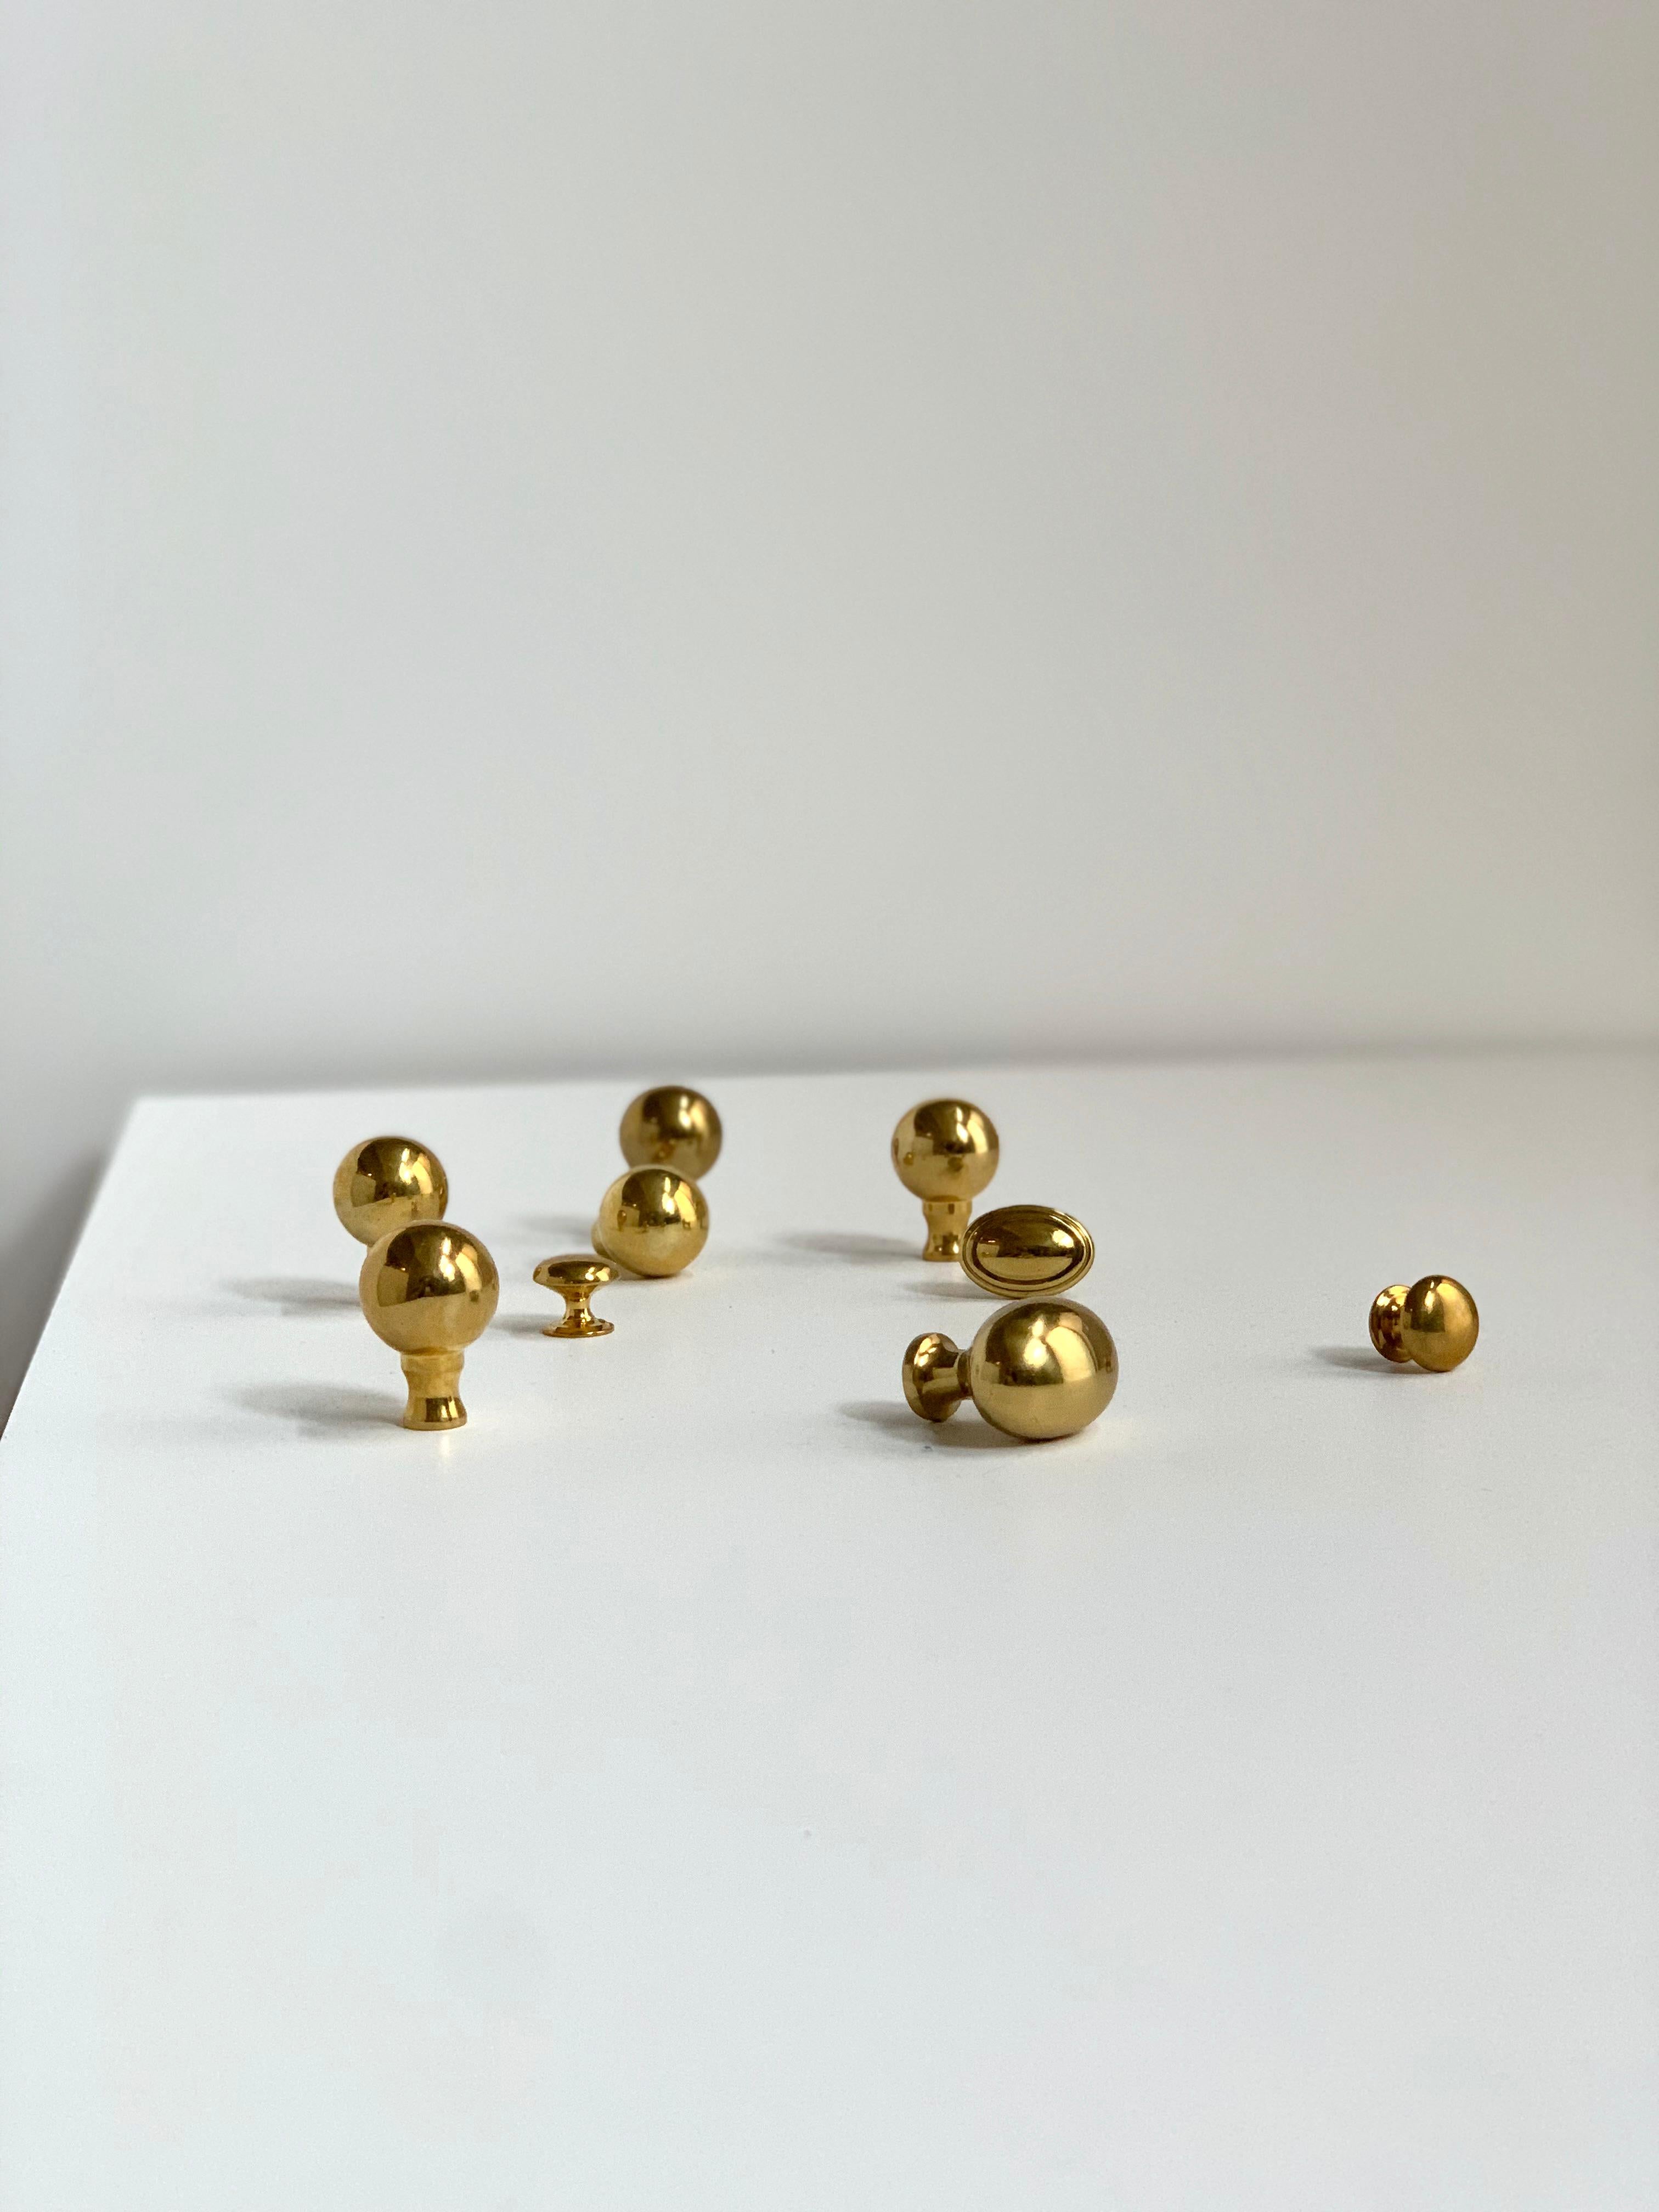 Vintage cast brass Baldwin Mid-Century Modern knob set, cabinet handles, 1960s. Carefully ' curated set of Portuguese cast metal knobs and handles, various shapes and sizes. Gorgeous set.